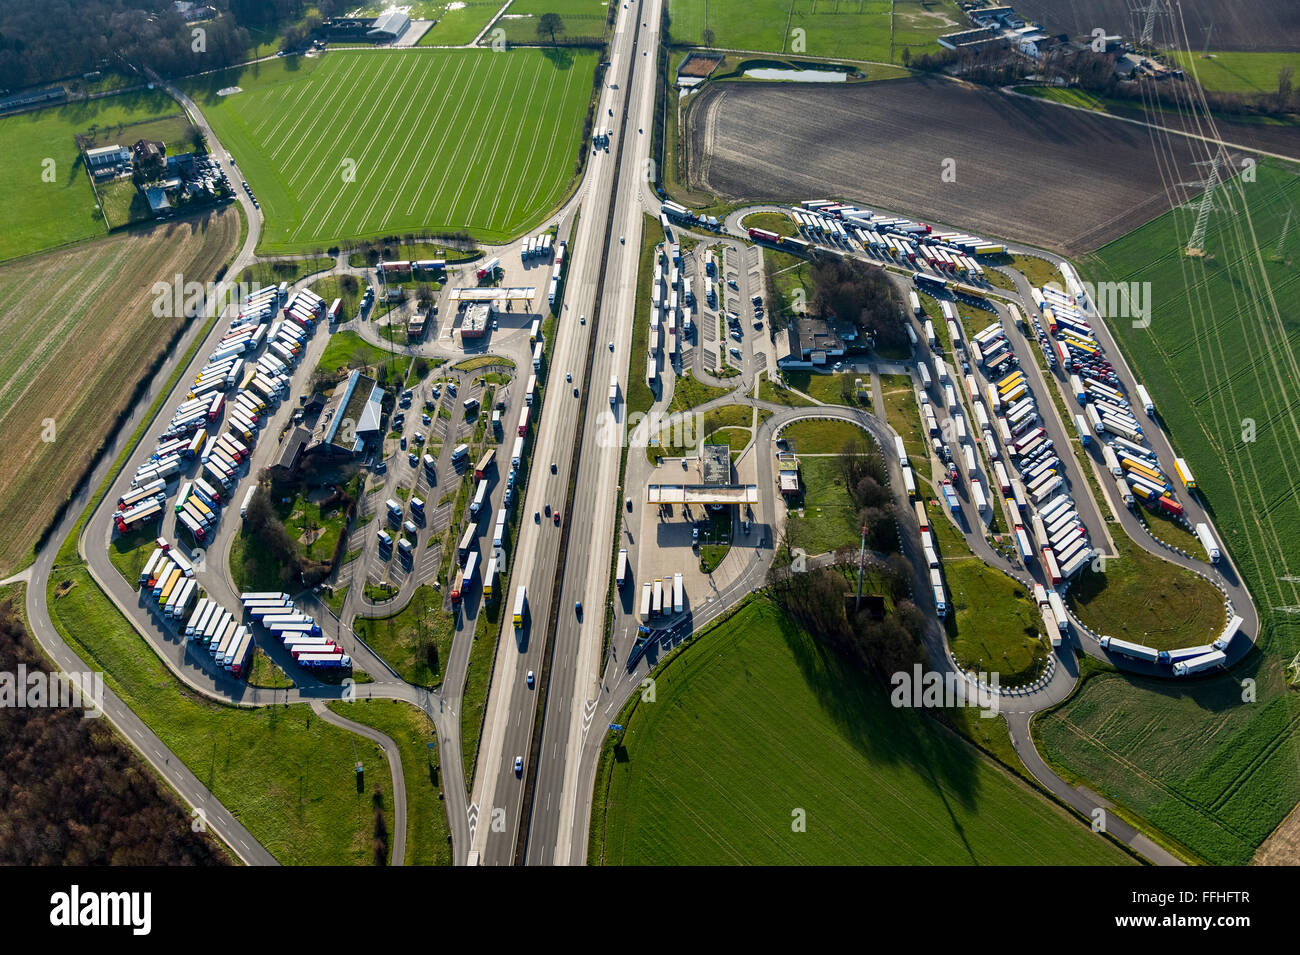 Aerial view, roadhouse, A4 motorway, Aachener Land Süd, Aachener Land Nord, driving times, truck parking, truck, logistics Stock Photo